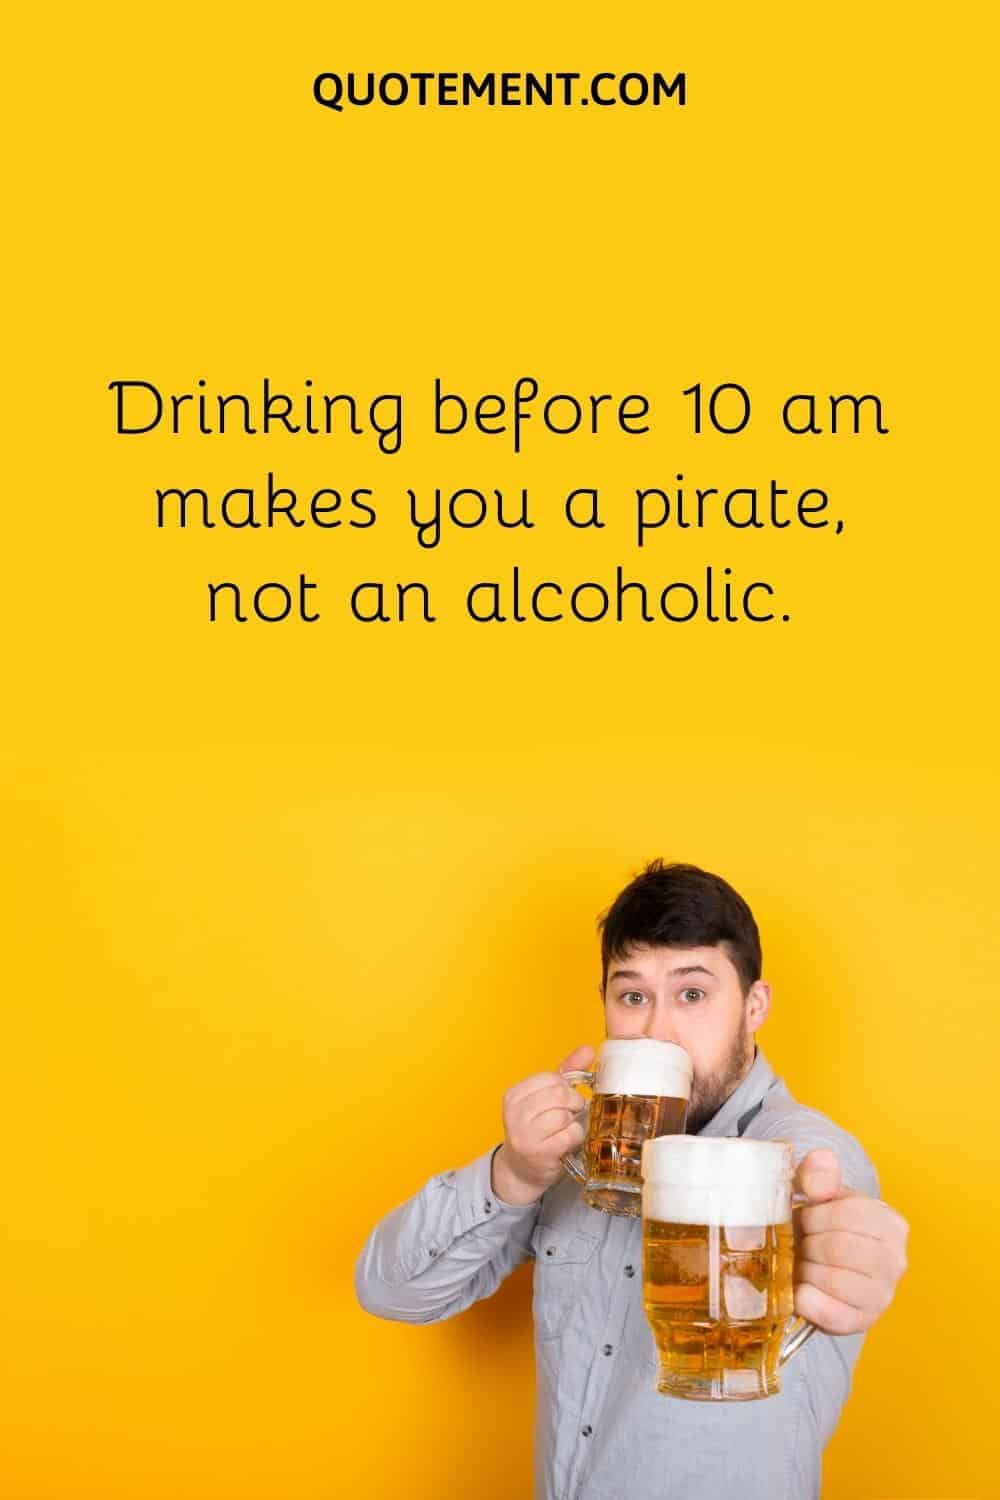 Drinking before 10 am makes you a pirate, not an alcoholic.